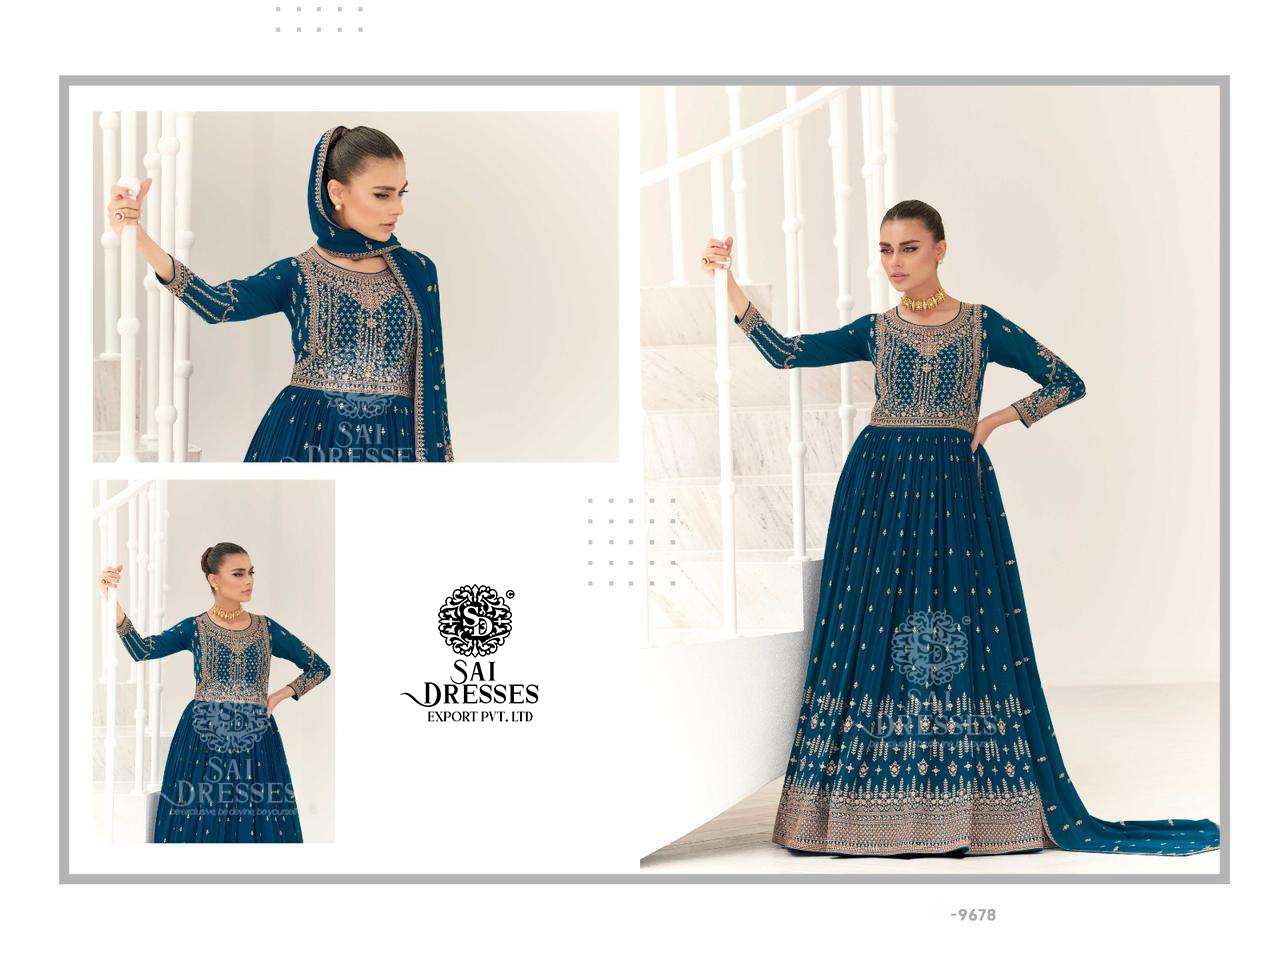 SAI DRESSES PRESENT TAARA READYMADE EXCLUSIVE WEAR DESIGNER LONG GOWN WITH DUPATTA IN WHOLESALE RATE IN SURAT